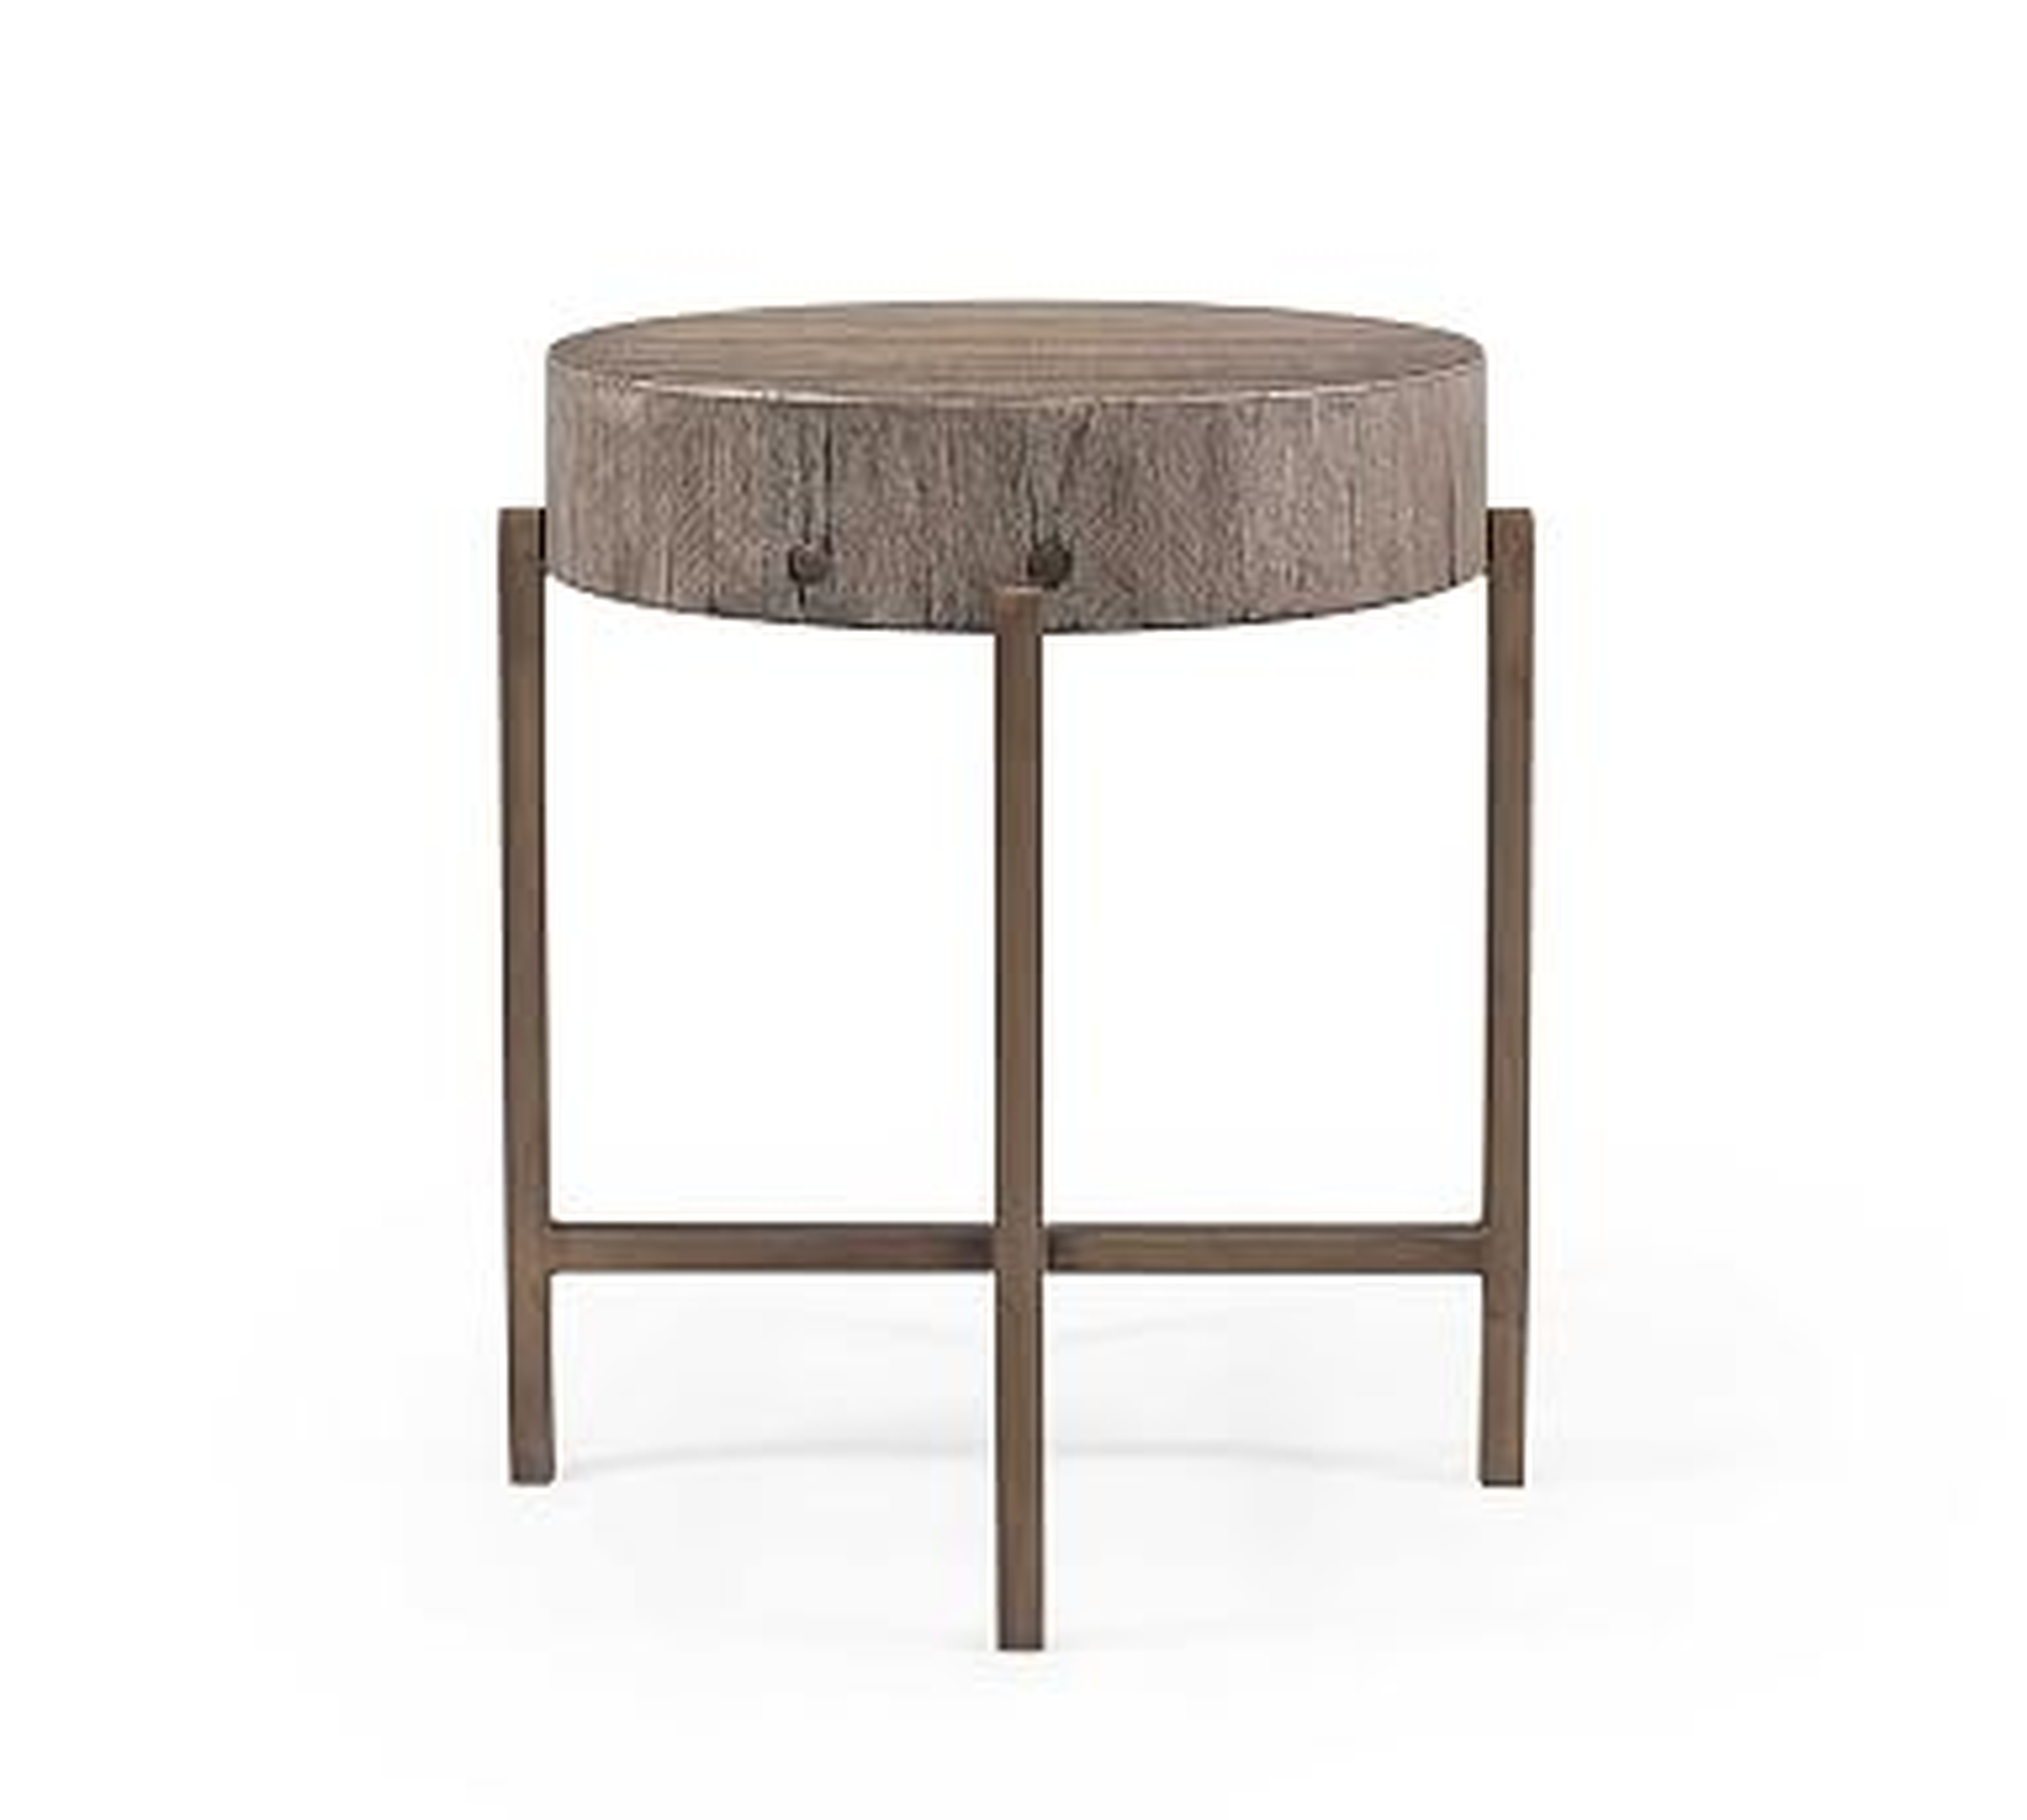 Fargo Round Reclaimed Wood End Table, Distressed Gray/Patina Copper - Pottery Barn